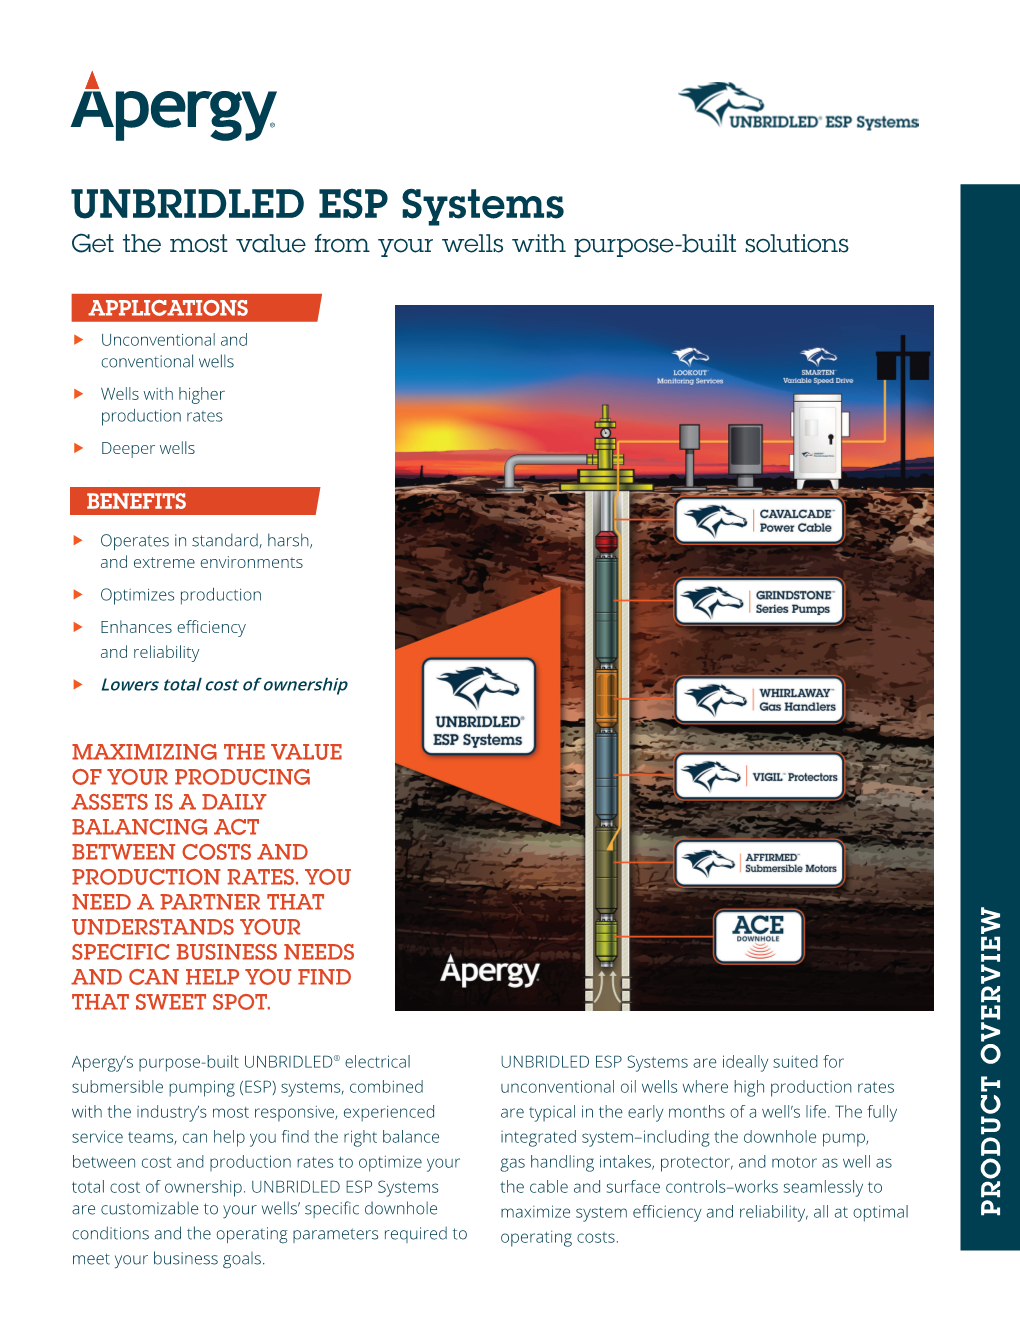 UNBRIDLED ESP Systems Get the Most Value from Your Wells with Purpose-Built Solutions